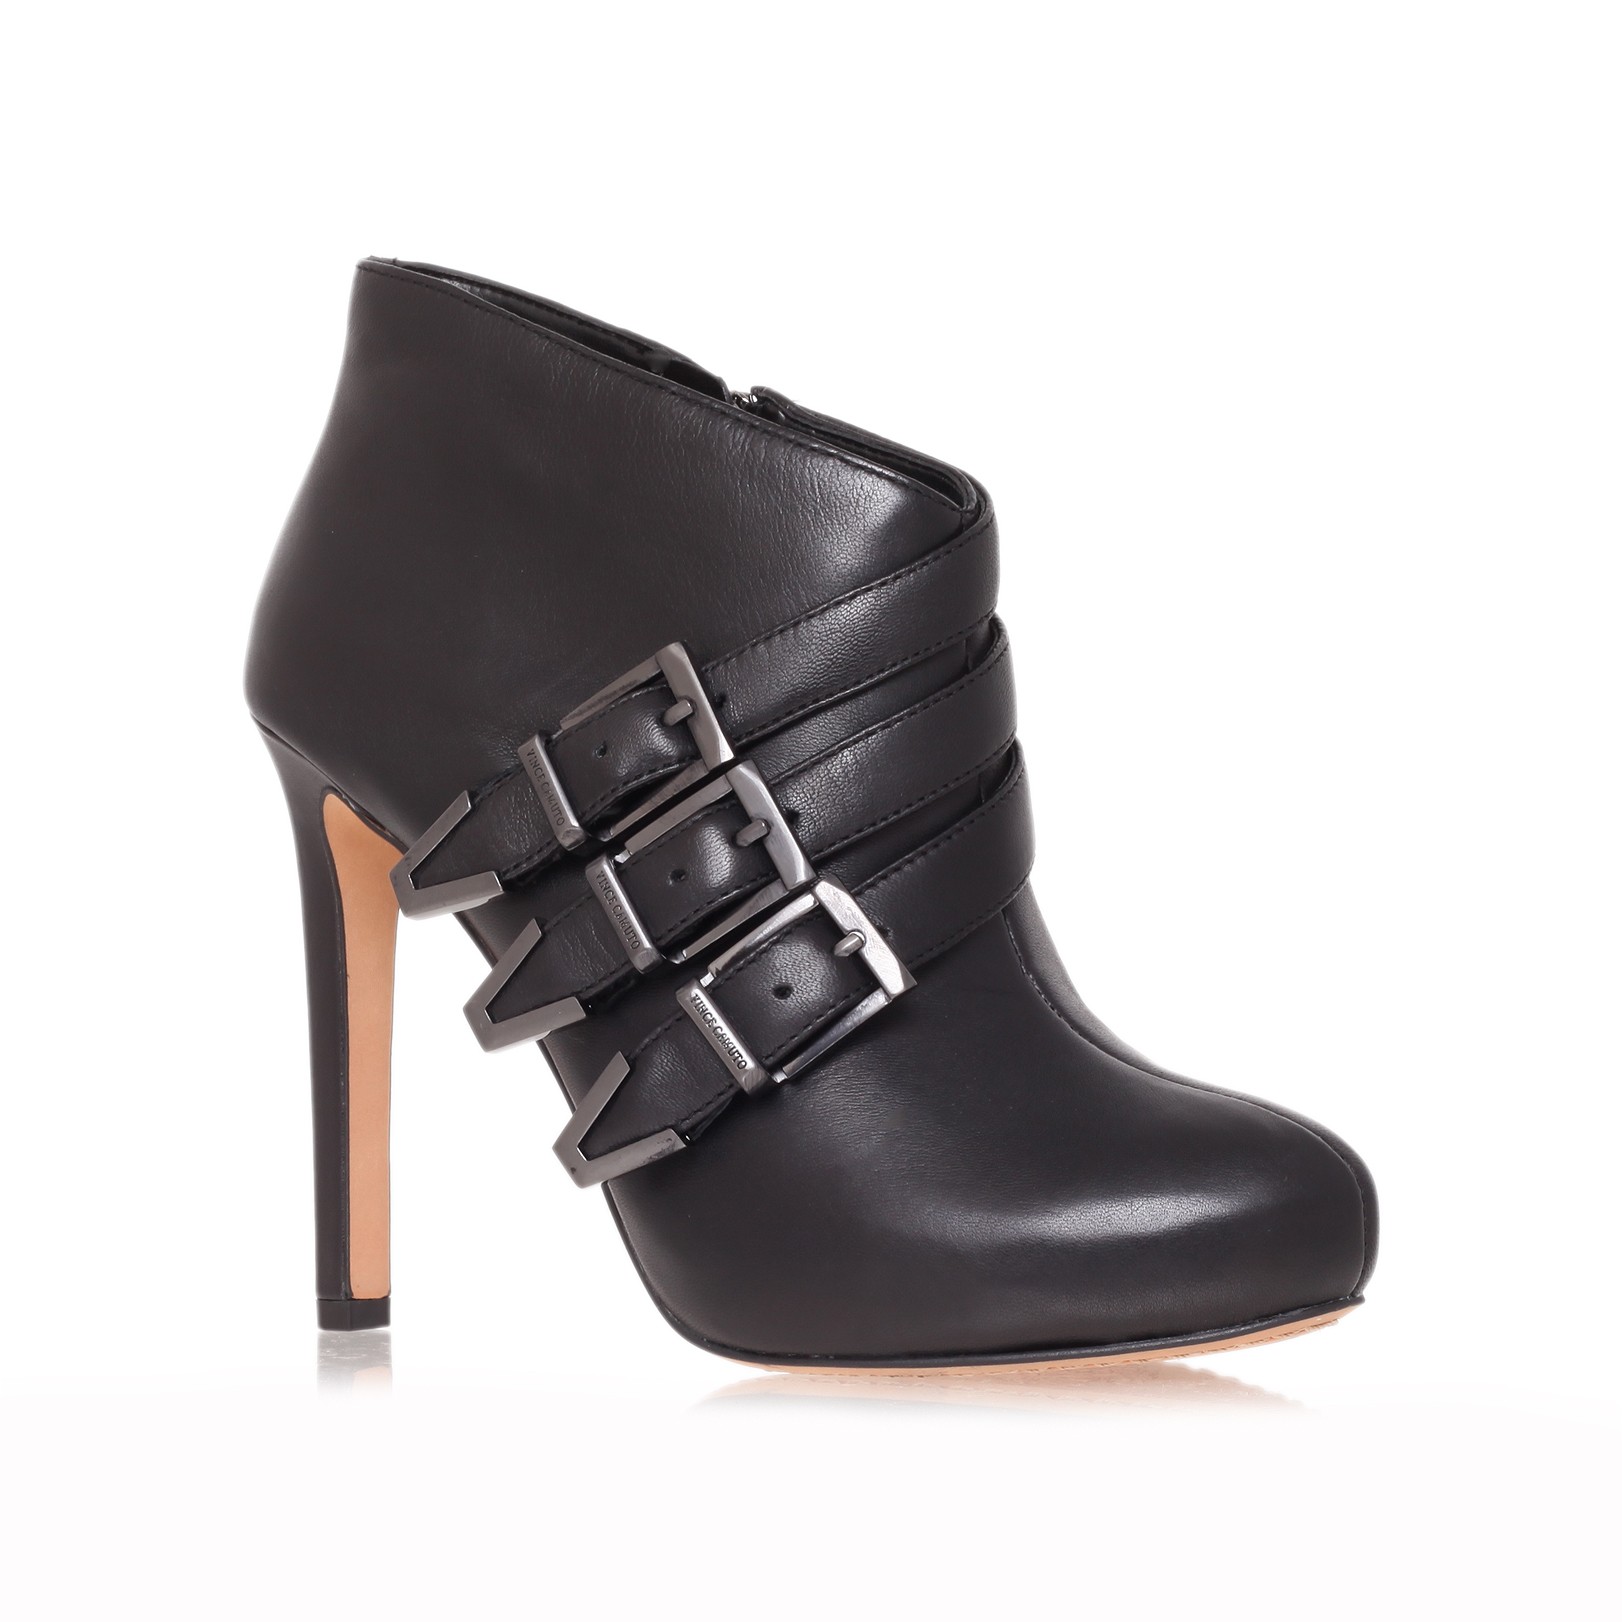 Vince camuto Ashia Shoe Boots in Black | Lyst